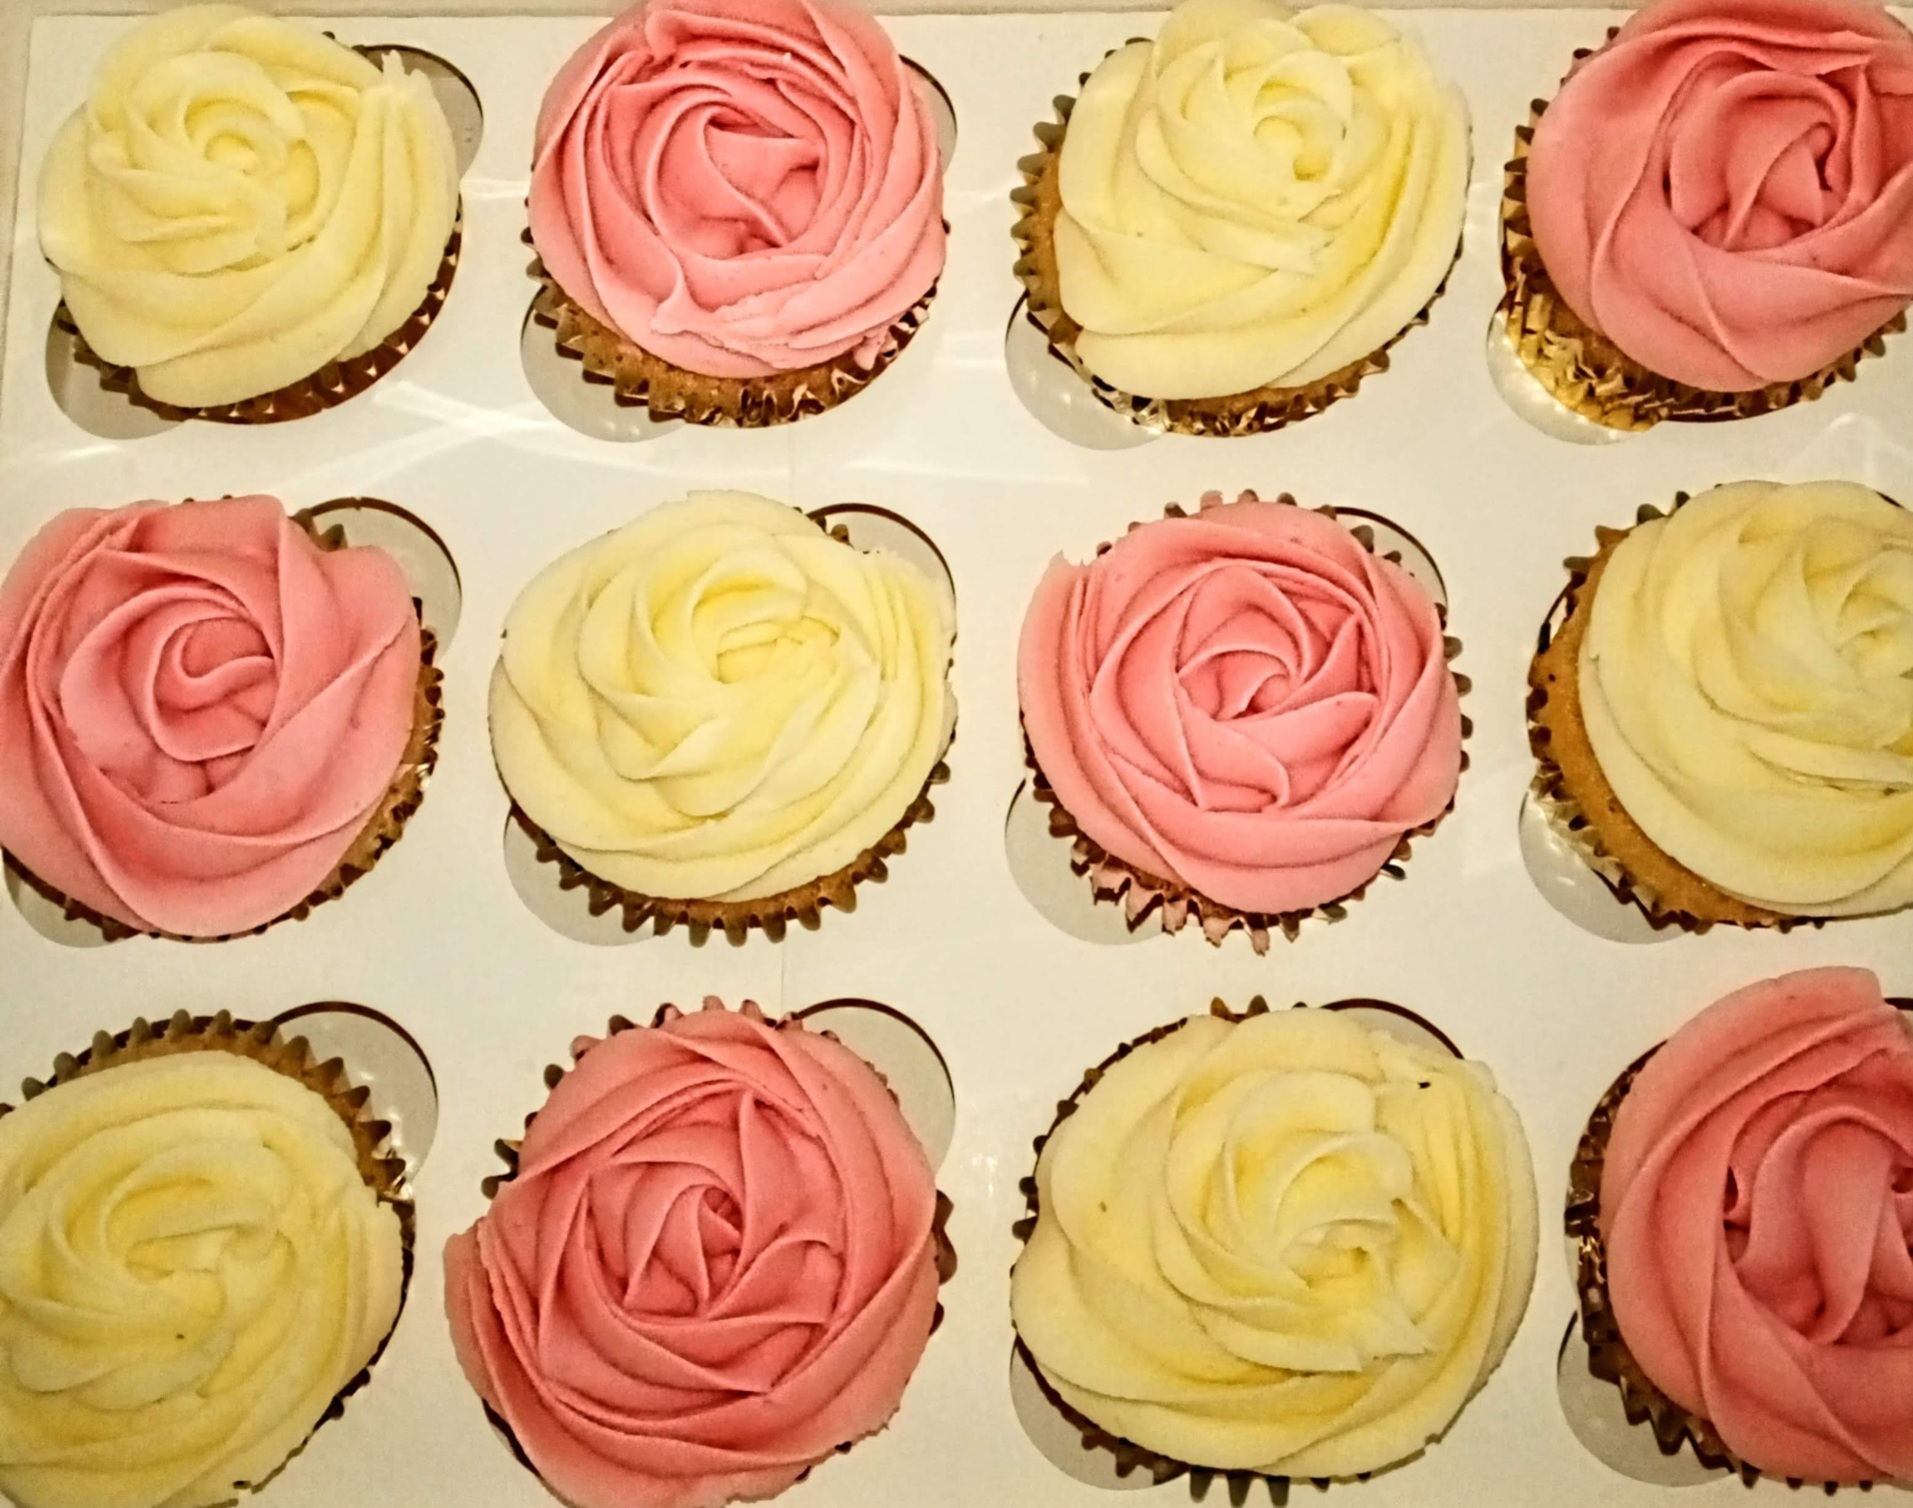 Plain rose swirl white and pink cupcakes